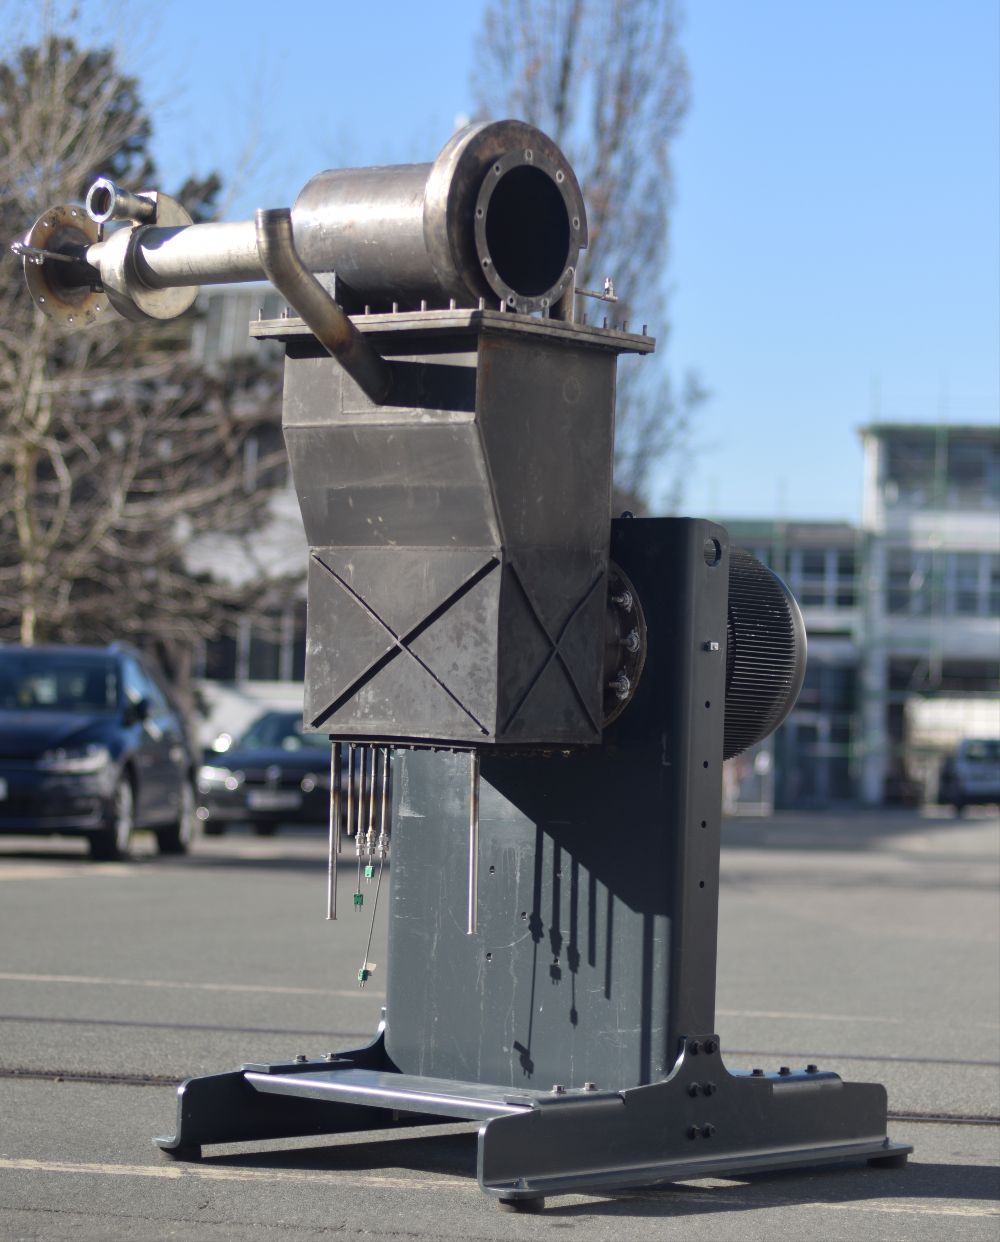 The photo shows the developed MINI CHP system with Stirling engine in a steel shell.